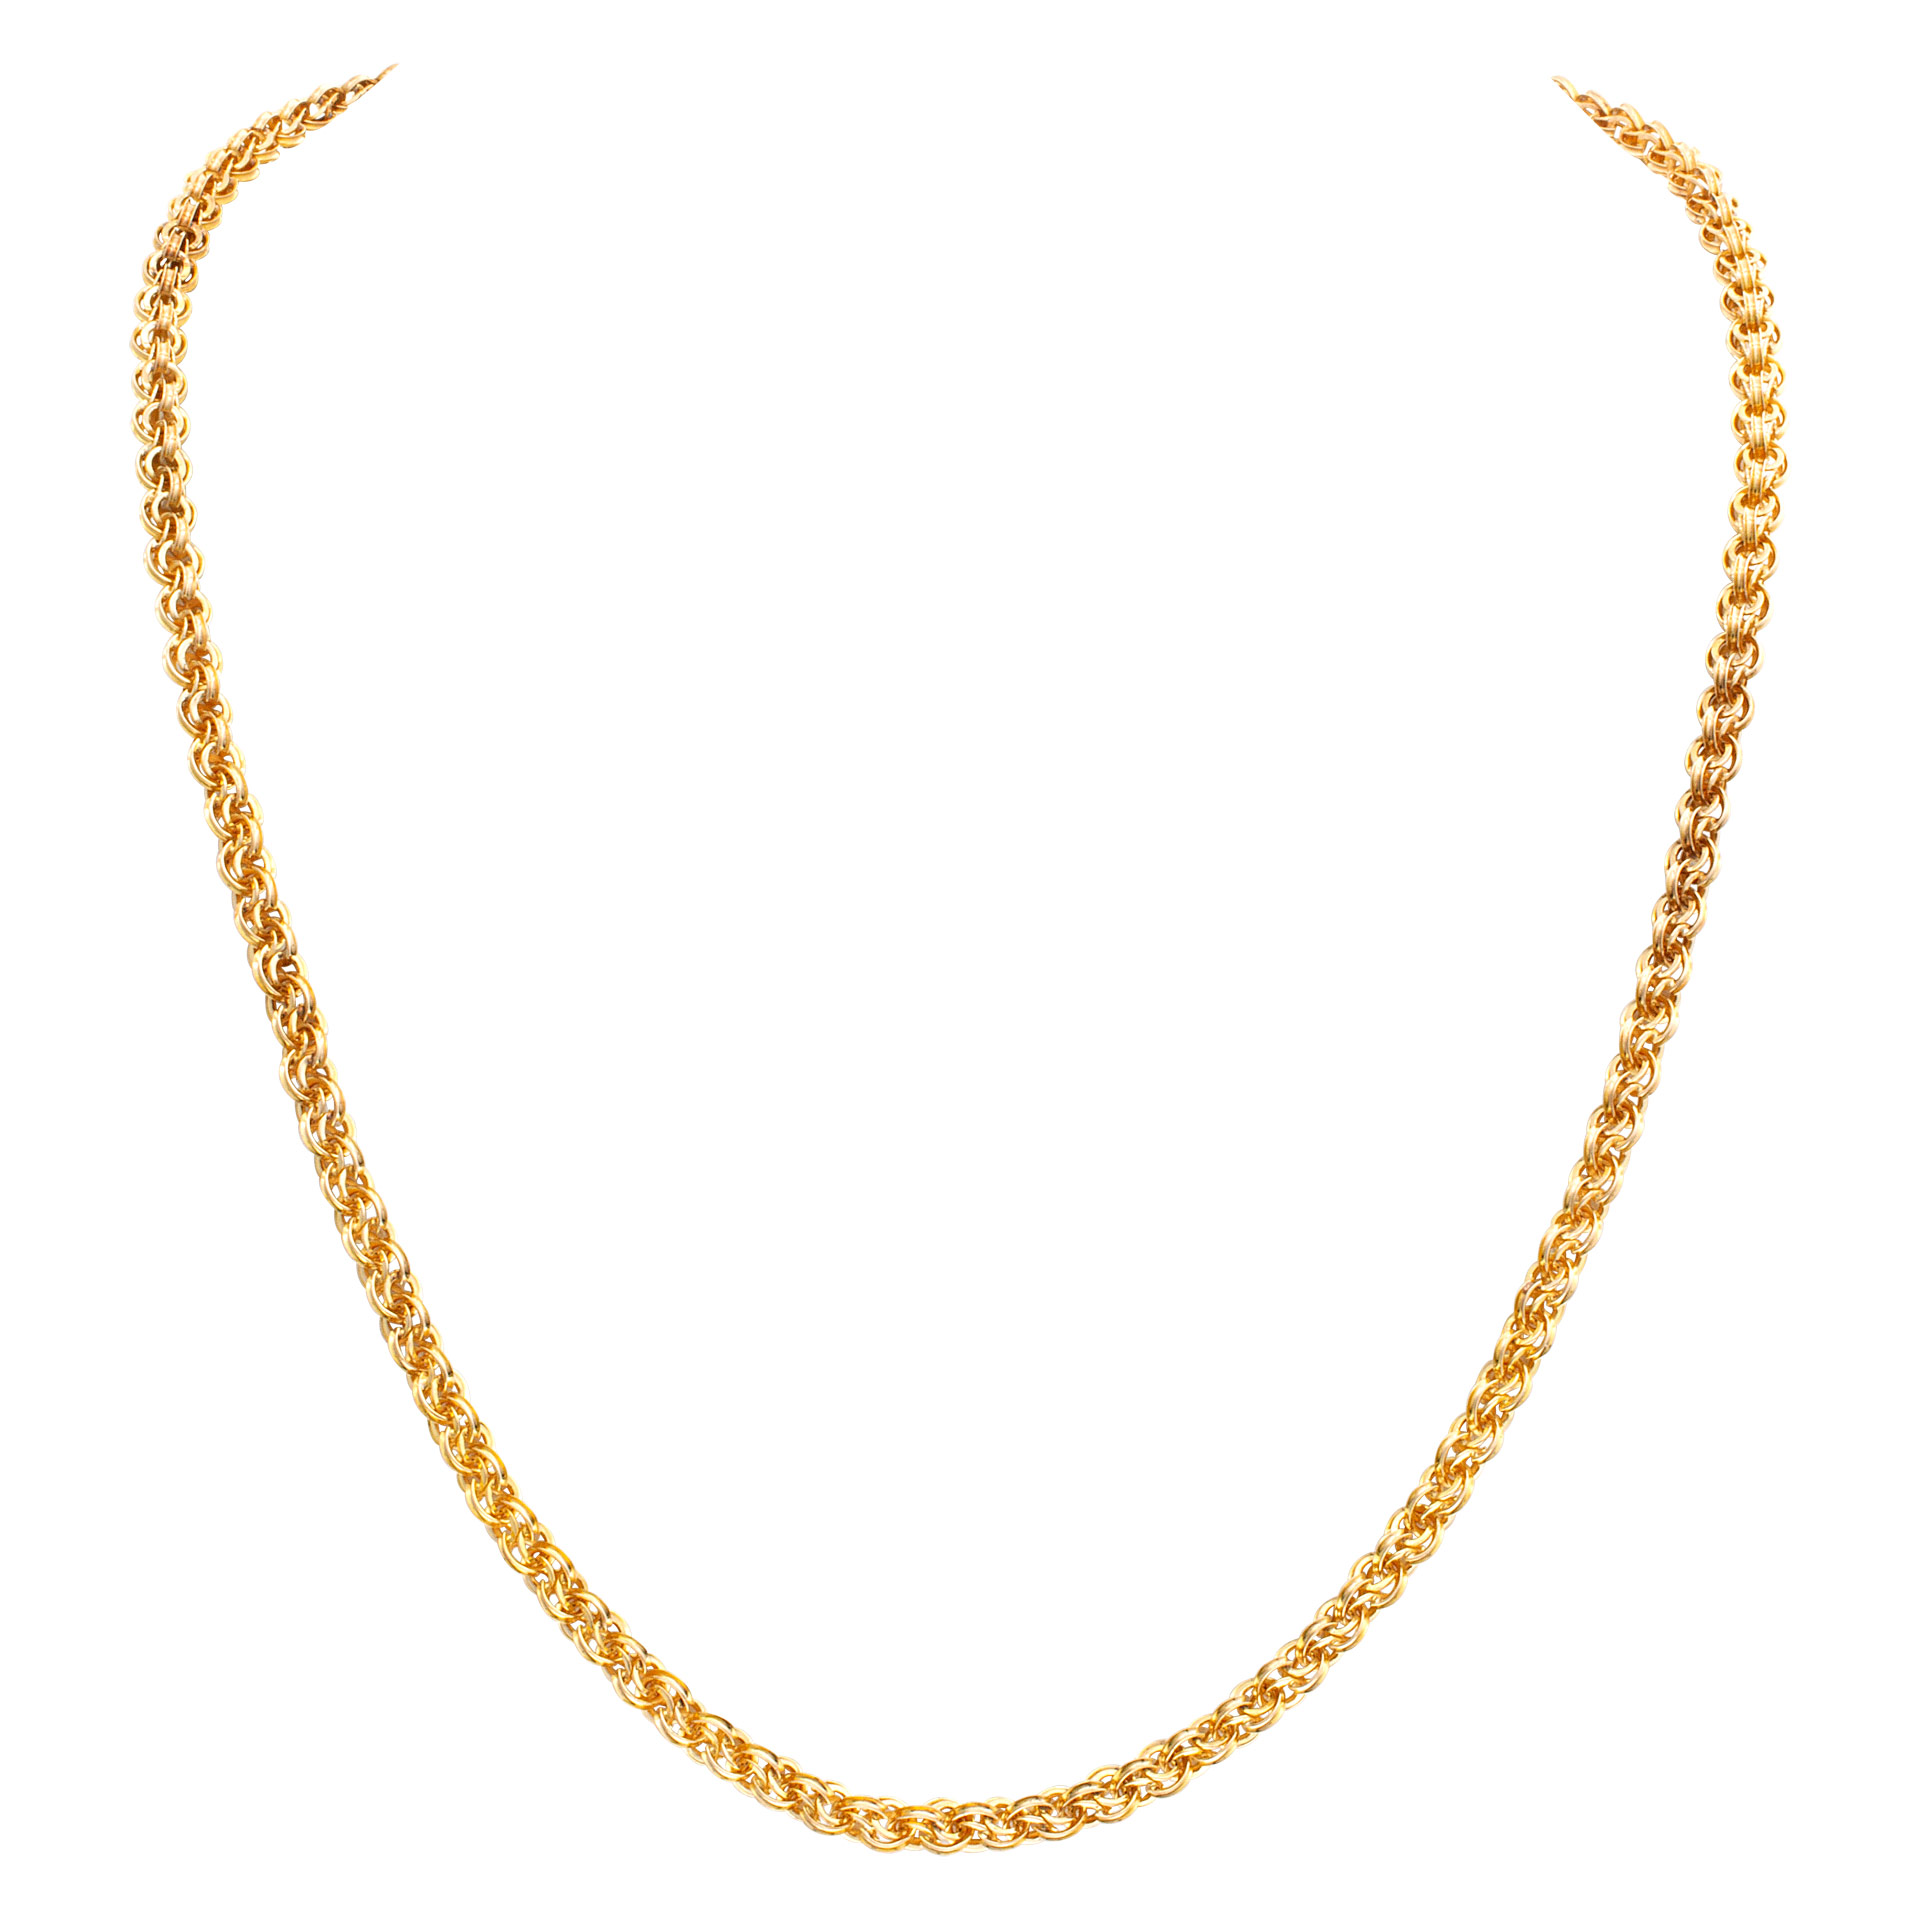 Intricate 14k yellow gold link necklace. Width: 4.8mm. Length: 20 inches.